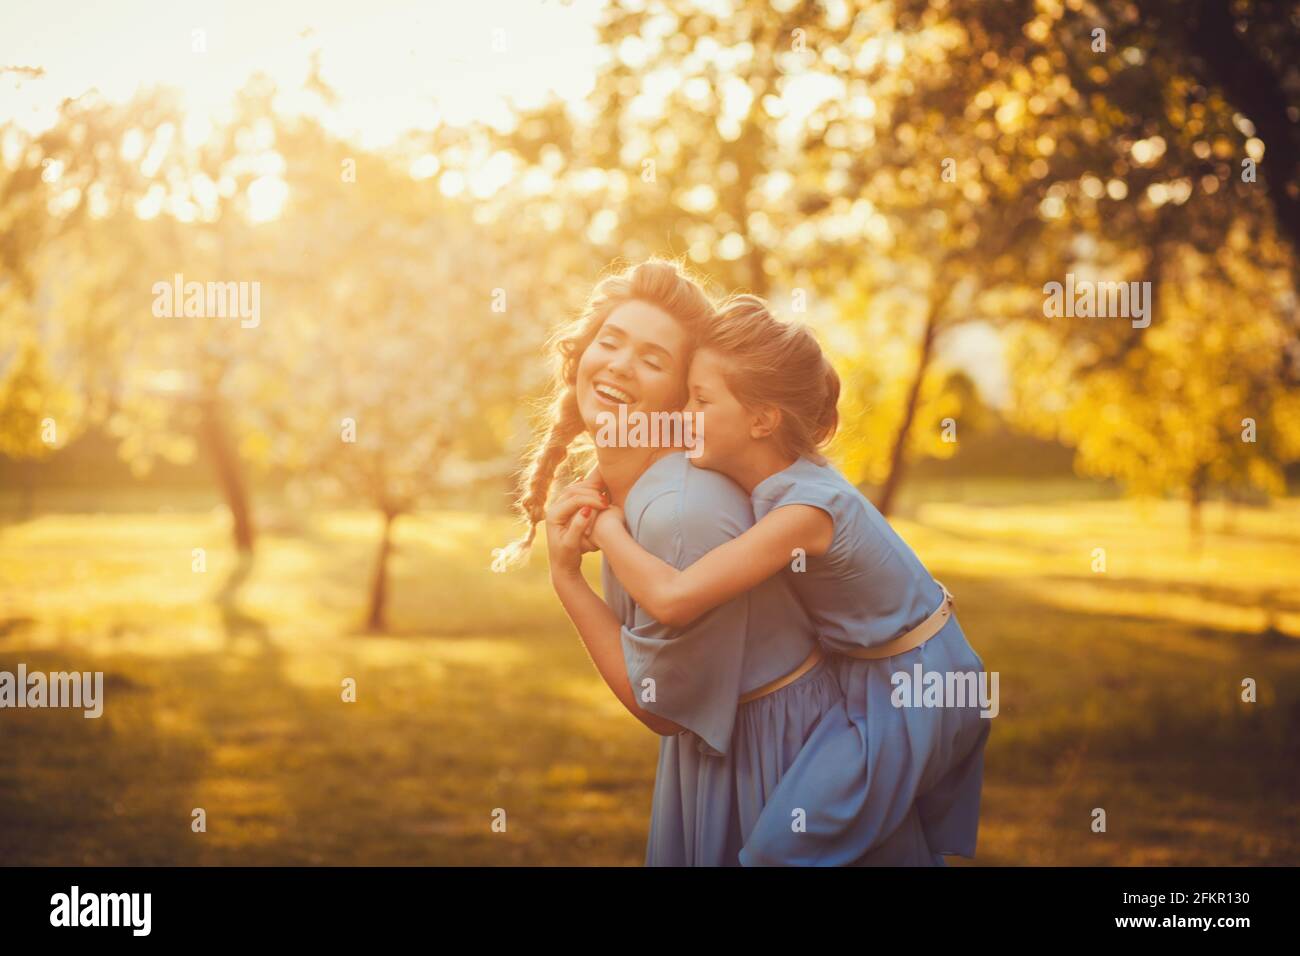 Mother and daughter playing together in a park Stock Photo